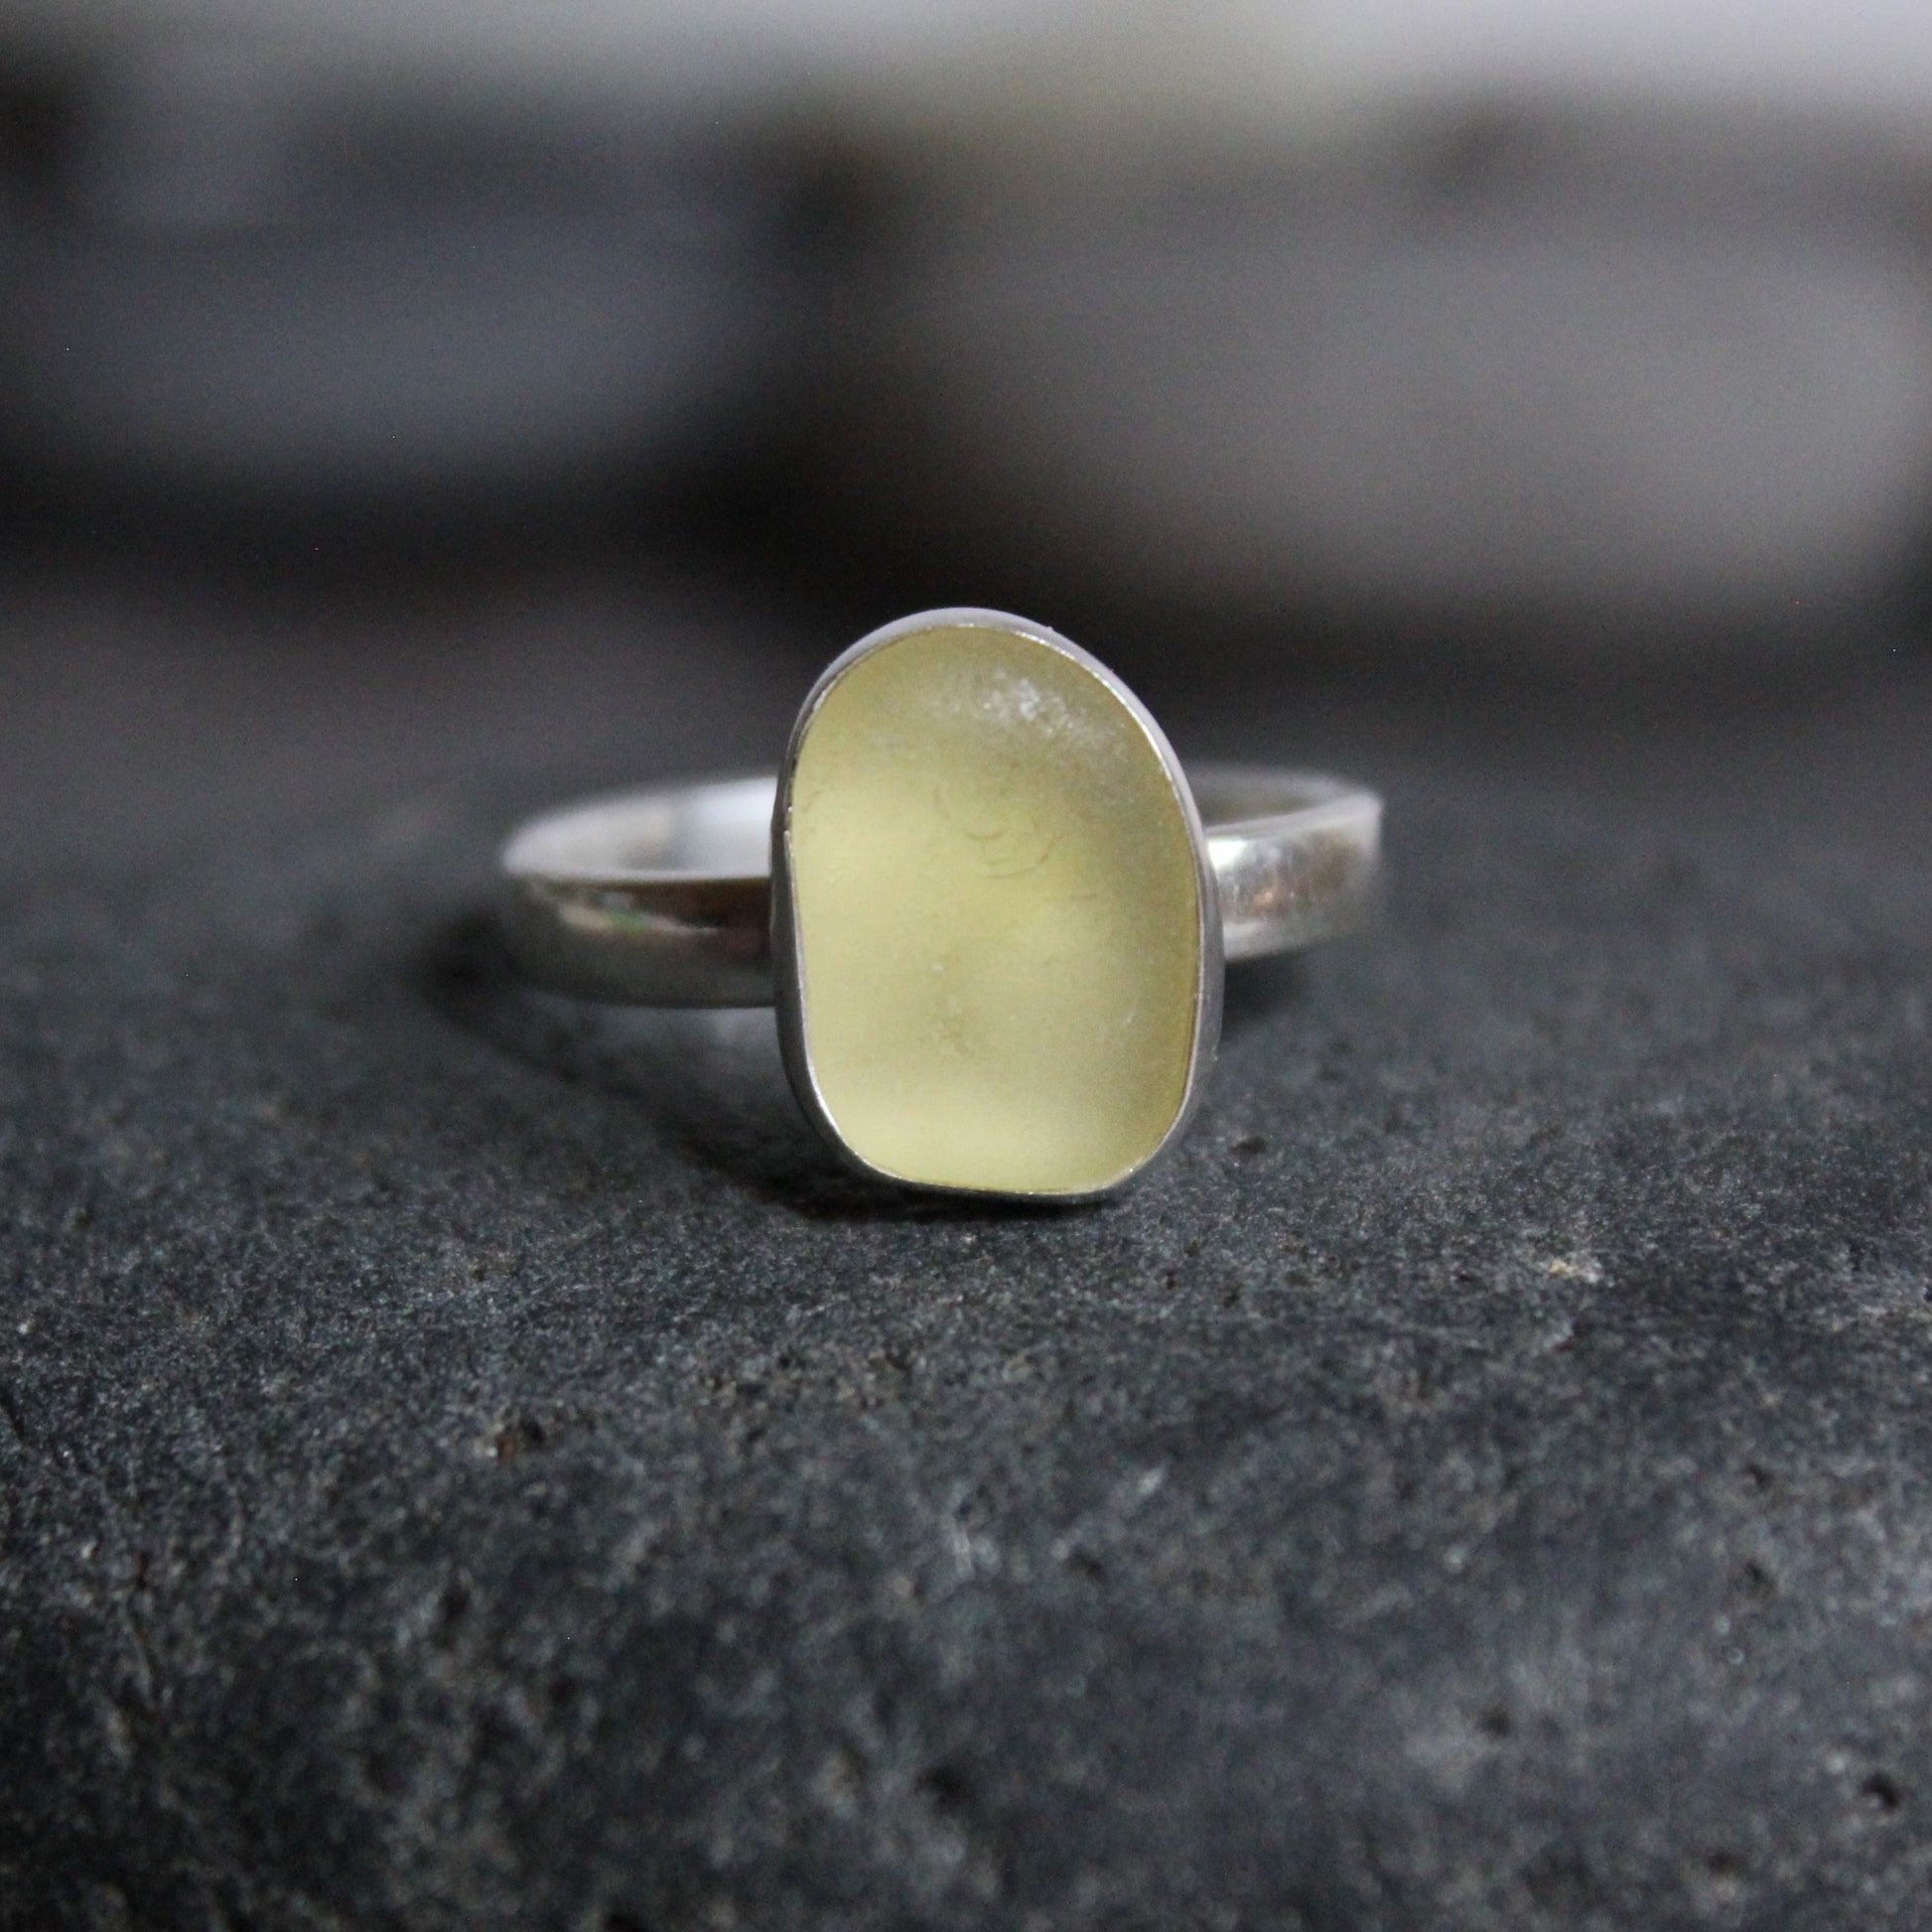 This ring has a pale yellow piece of sea glass set in a fine & sterling silver bezel setting on a sturdy silver band. 